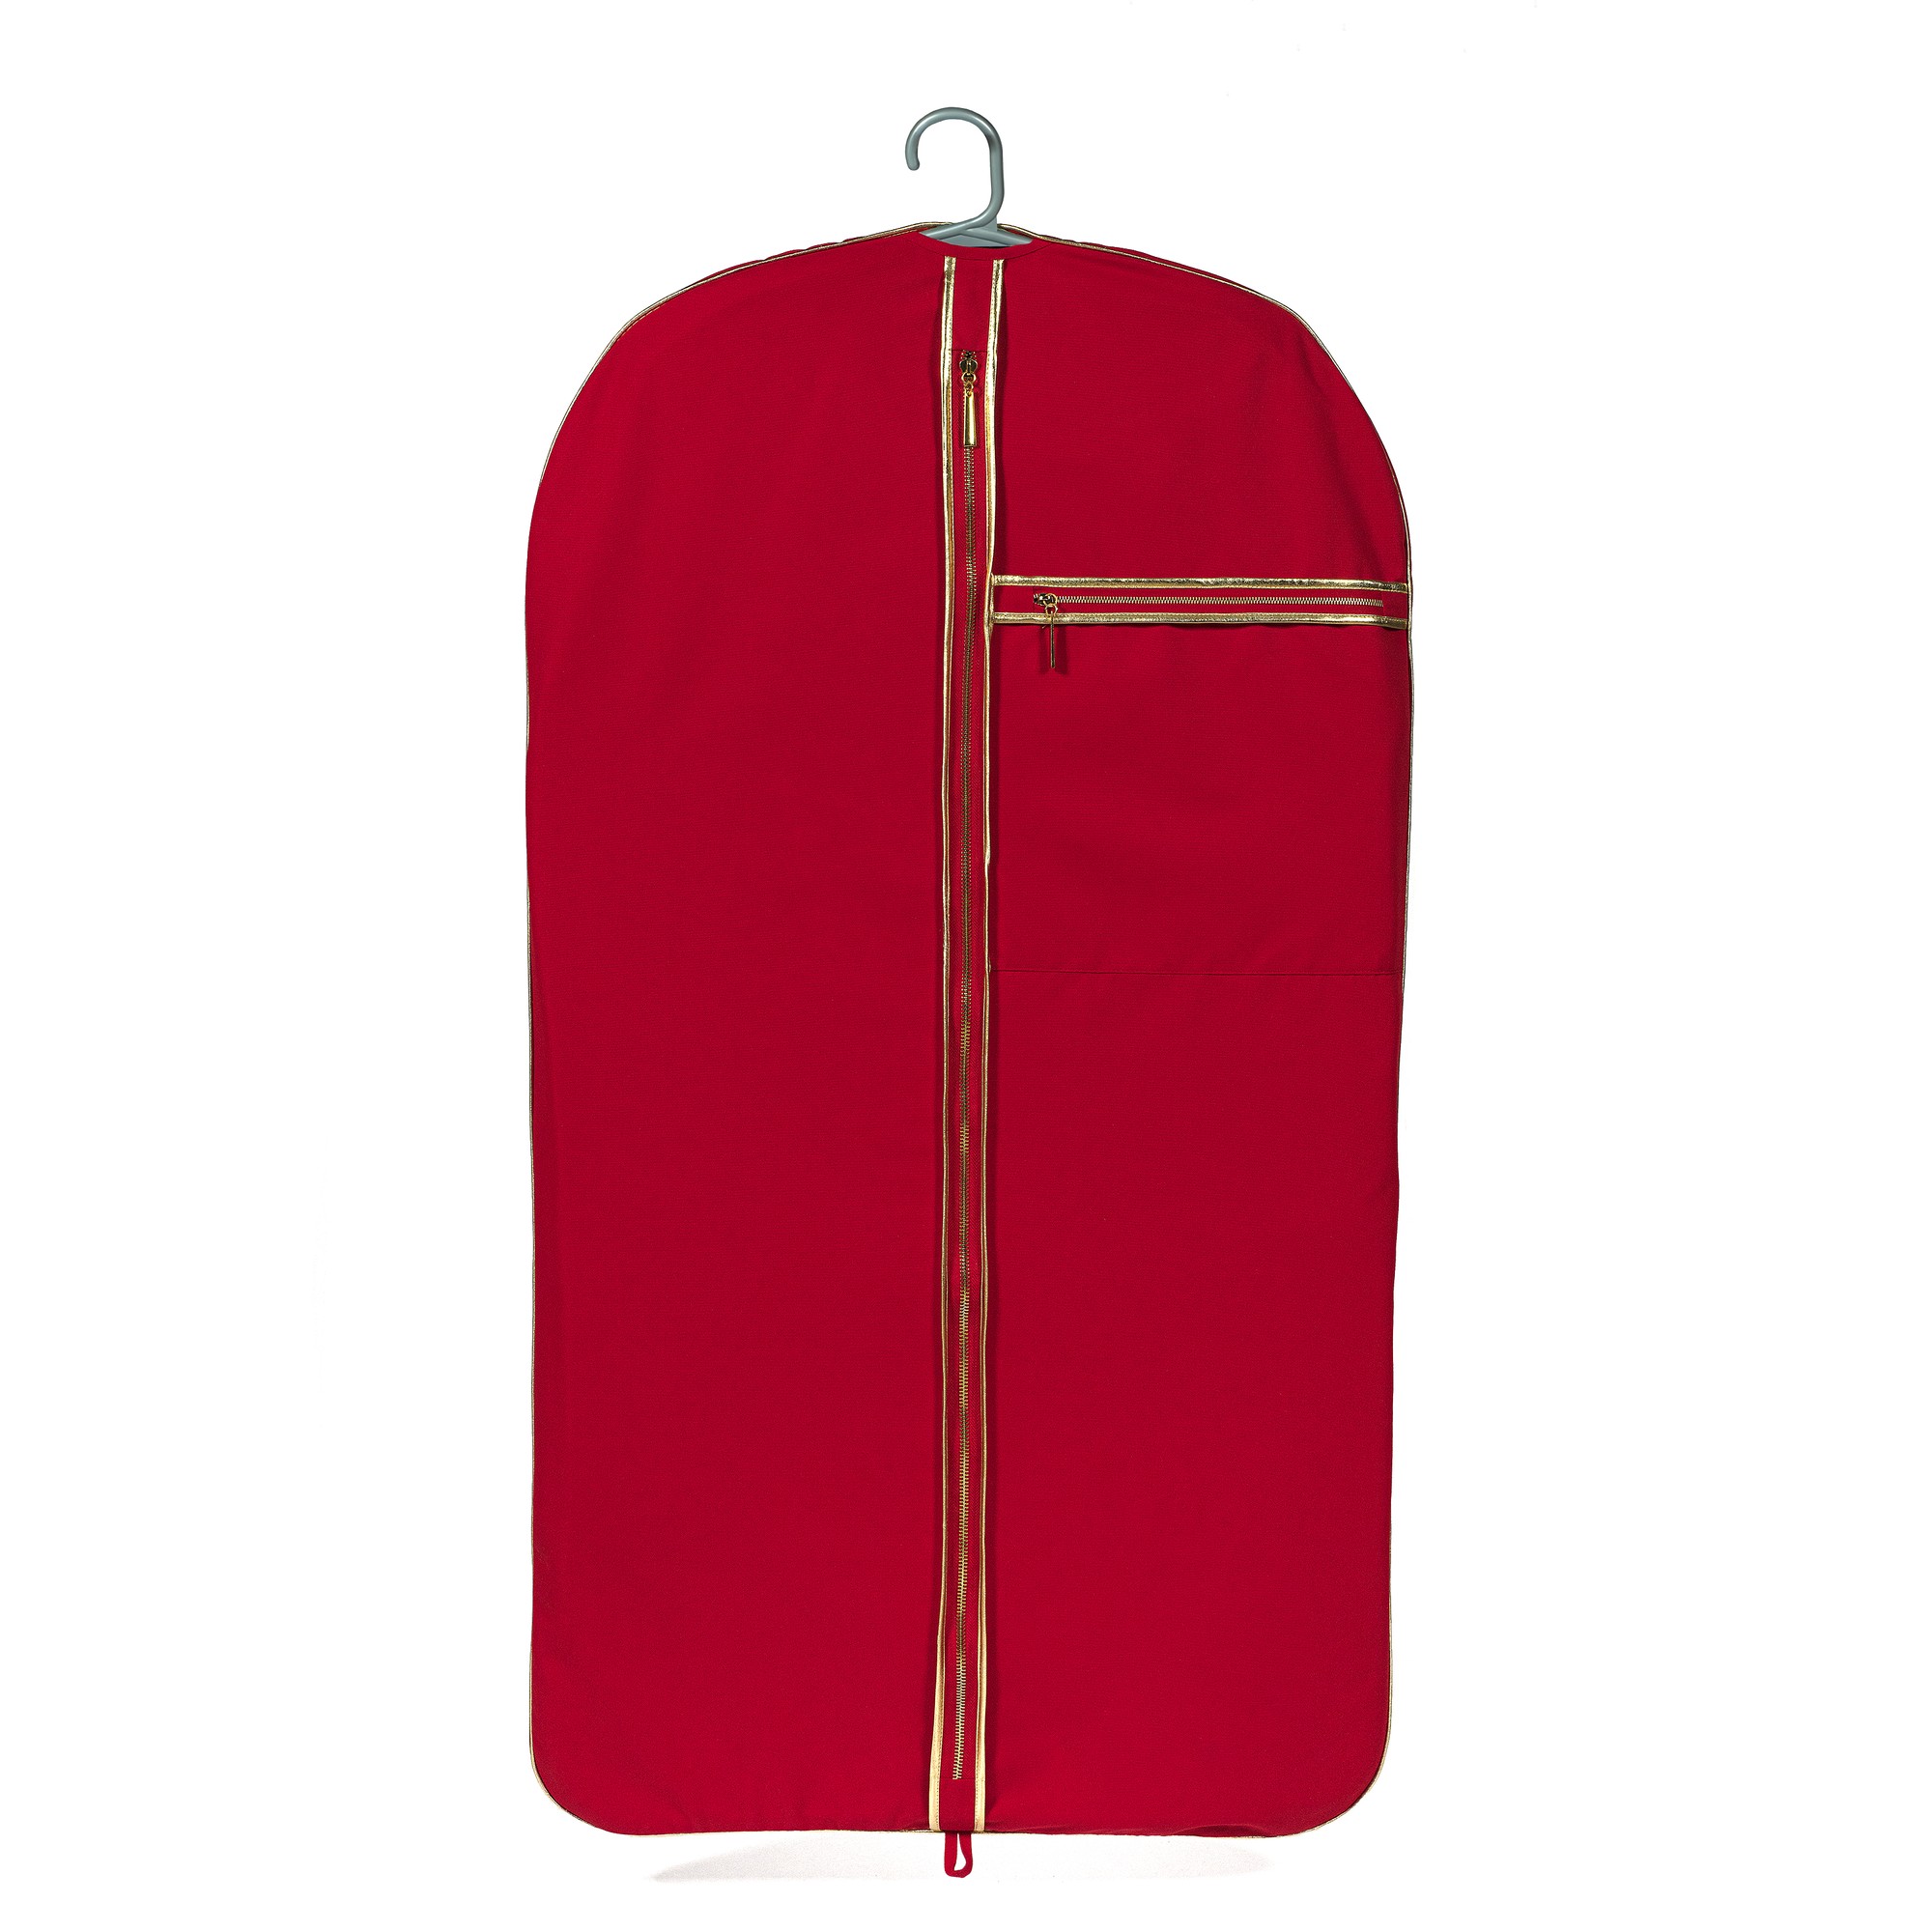 Hanging Garment Bag Red with gold Suit Bag Travel Bag Business suit